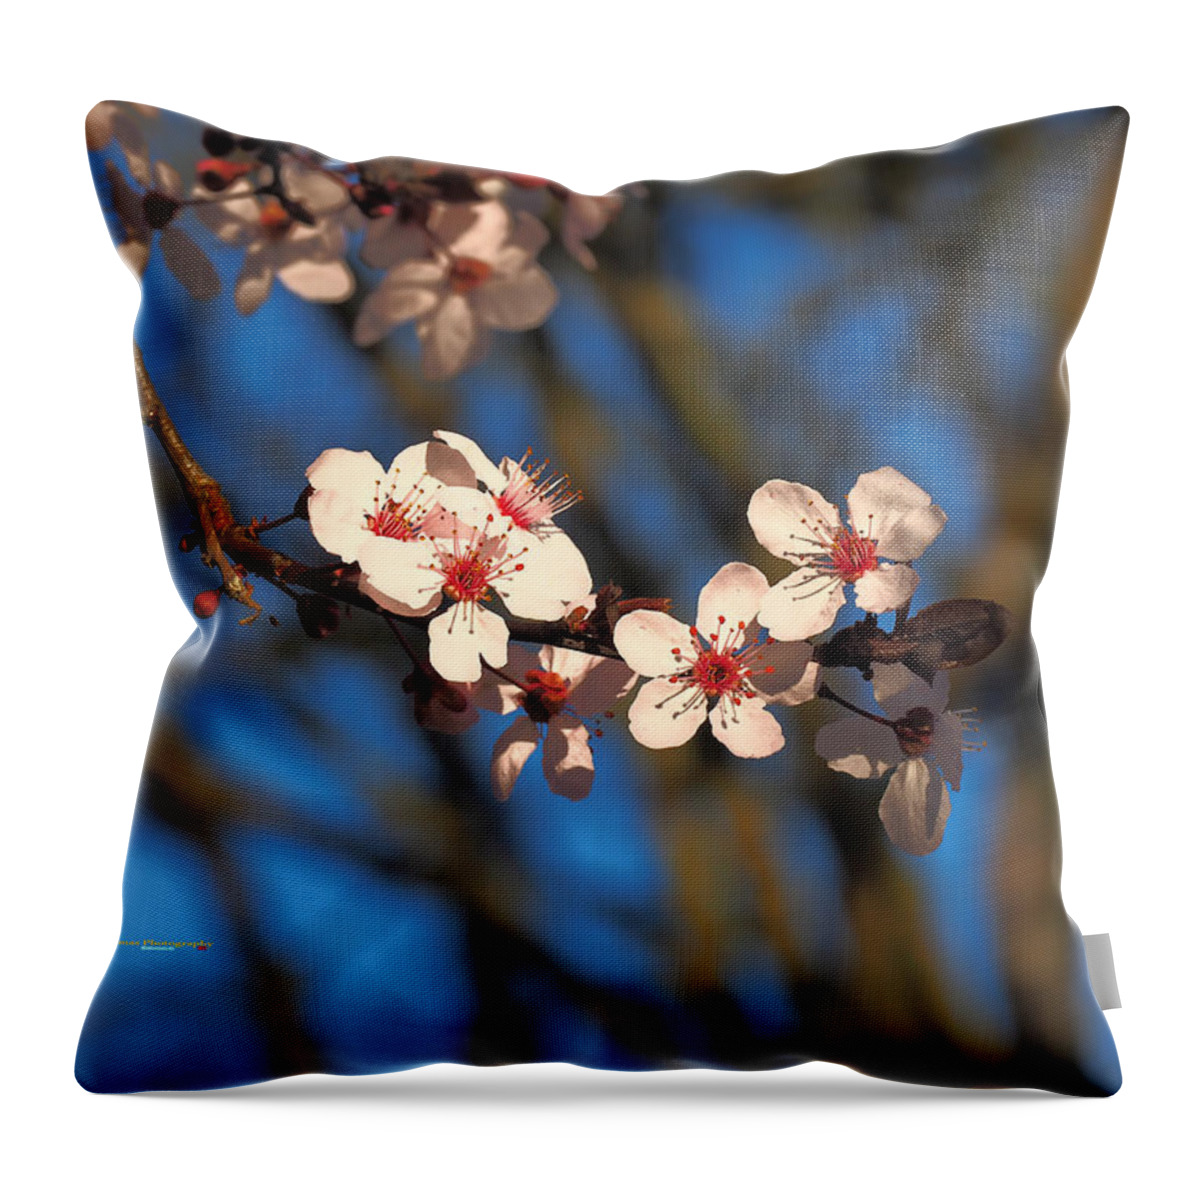 Botanical Throw Pillow featuring the photograph Cherry Blossom Grouping by Richard Thomas